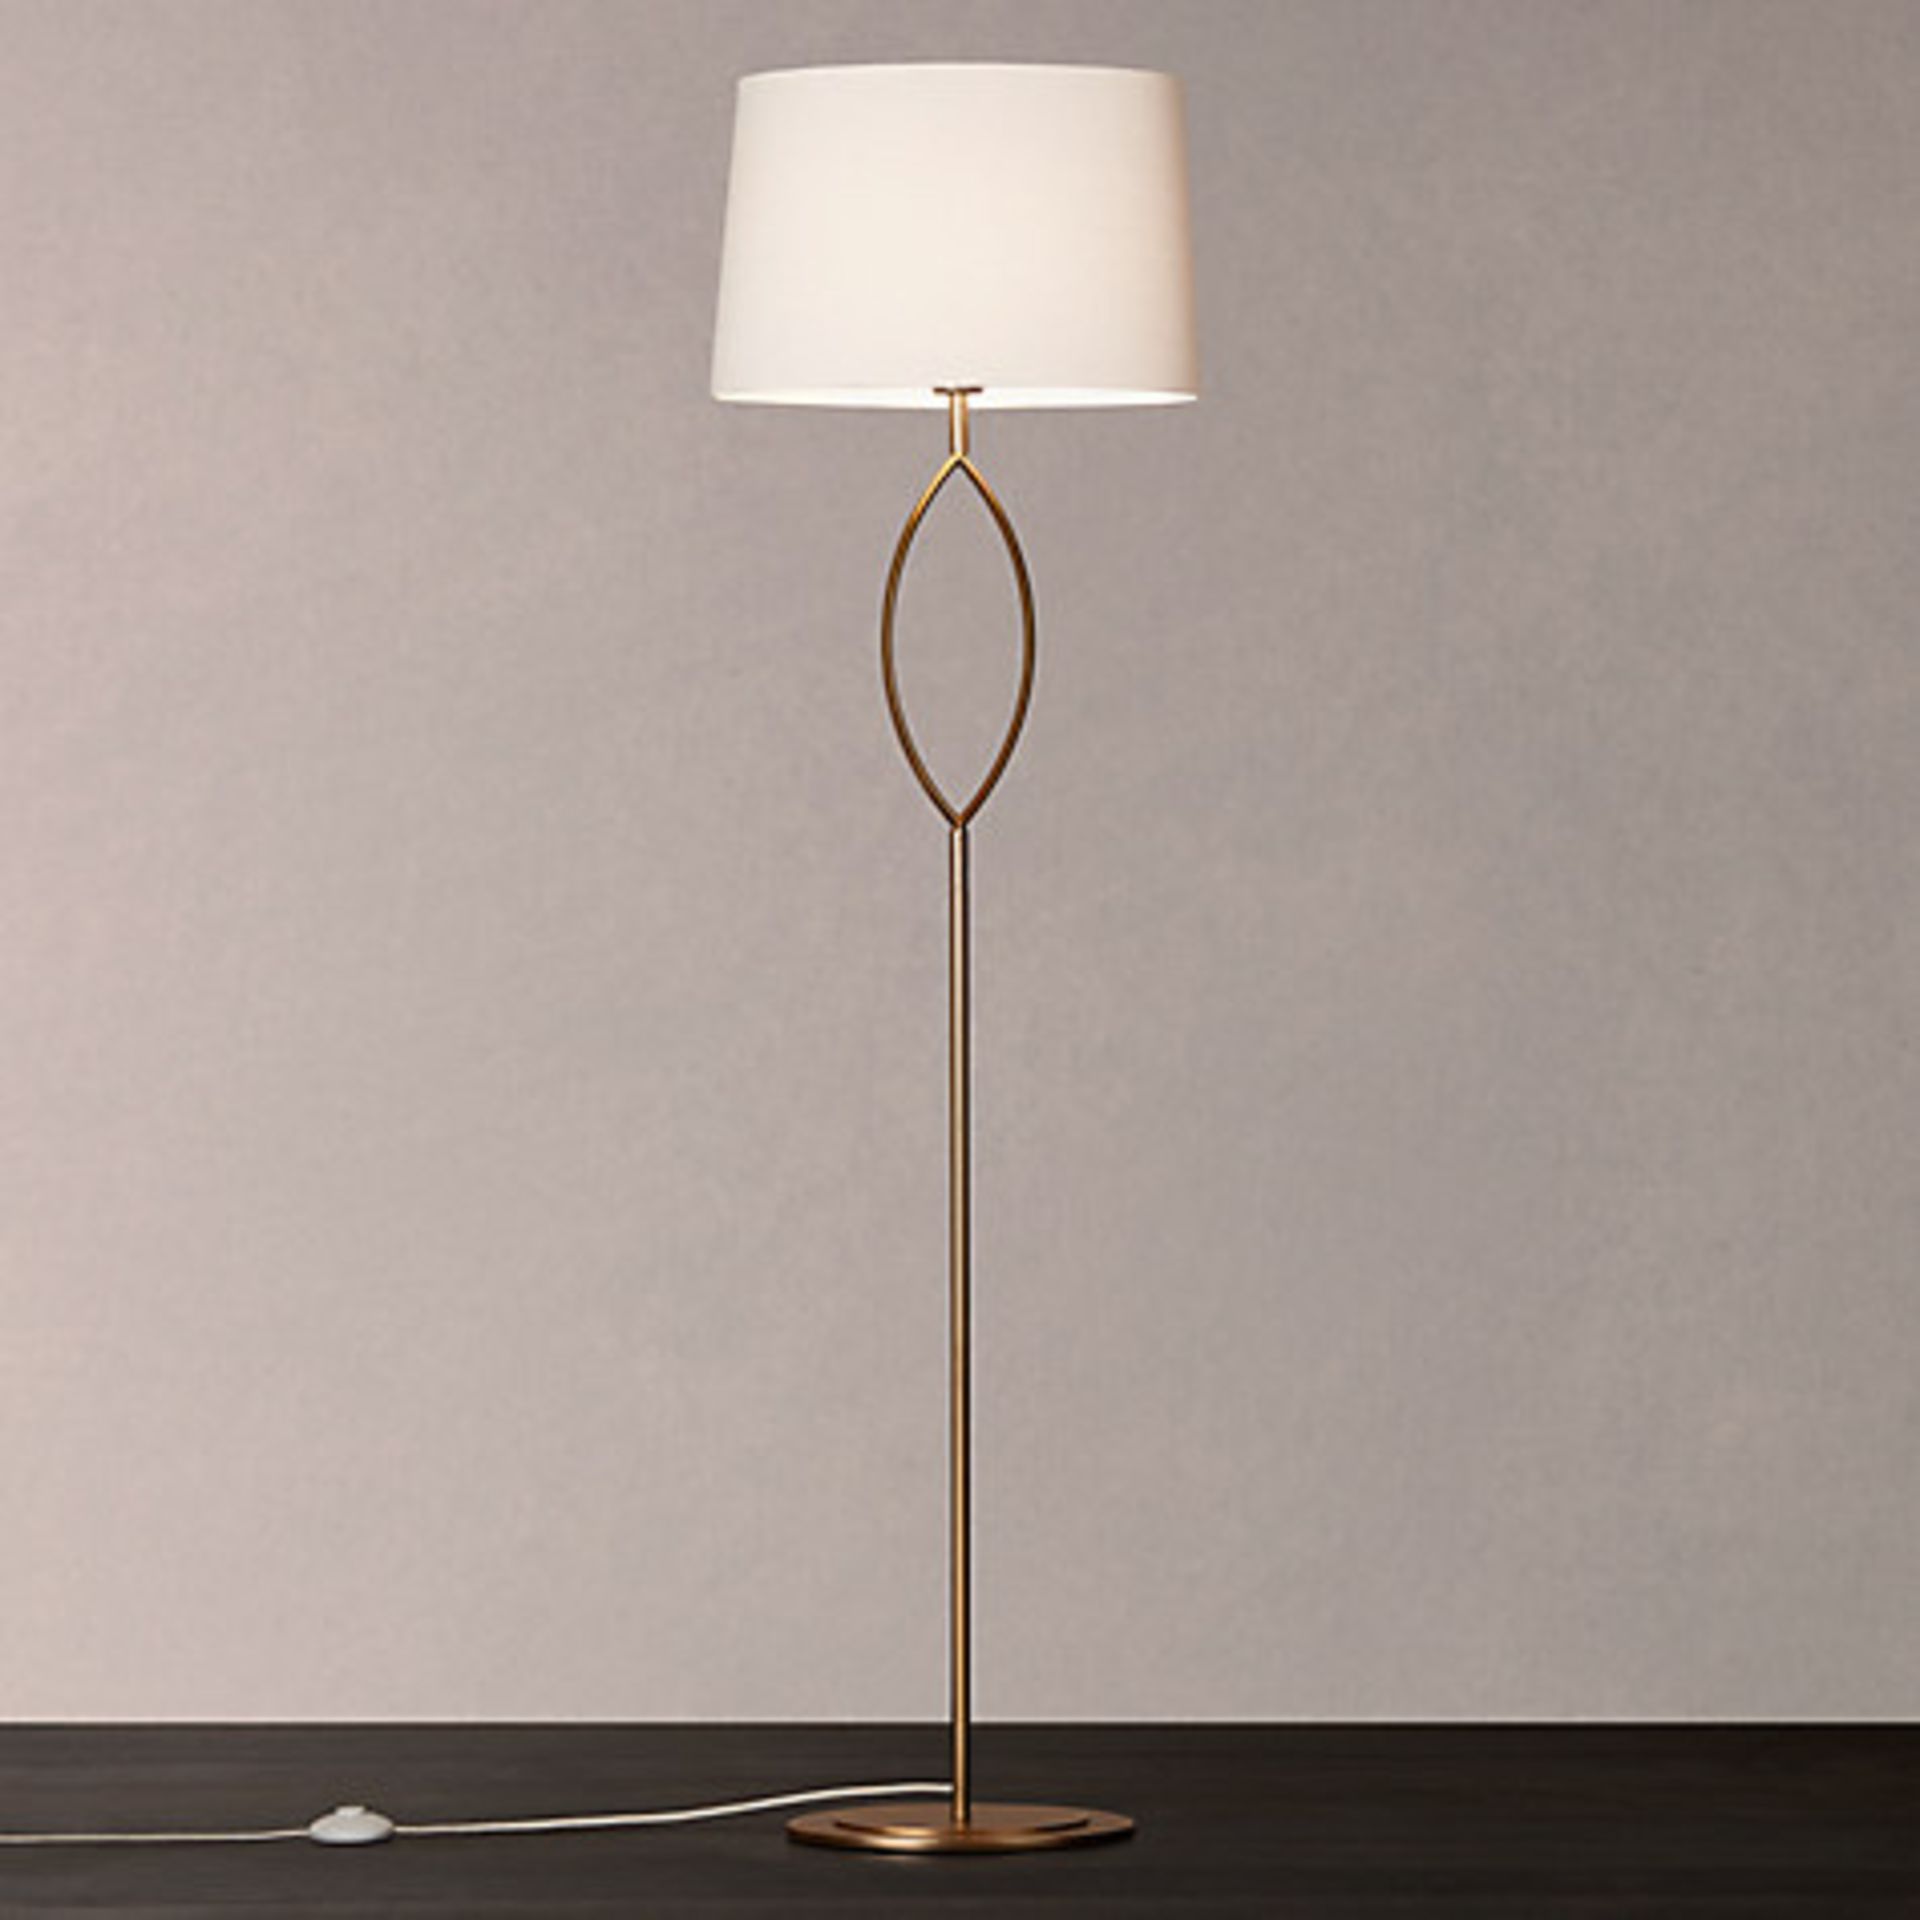 1 x BOXED LOPEZ CHROME TALL FLOOR LAMP WITH LINEN SHADE RRP £130 (19.4.17) *PLEASE NOTE THAT THE BID